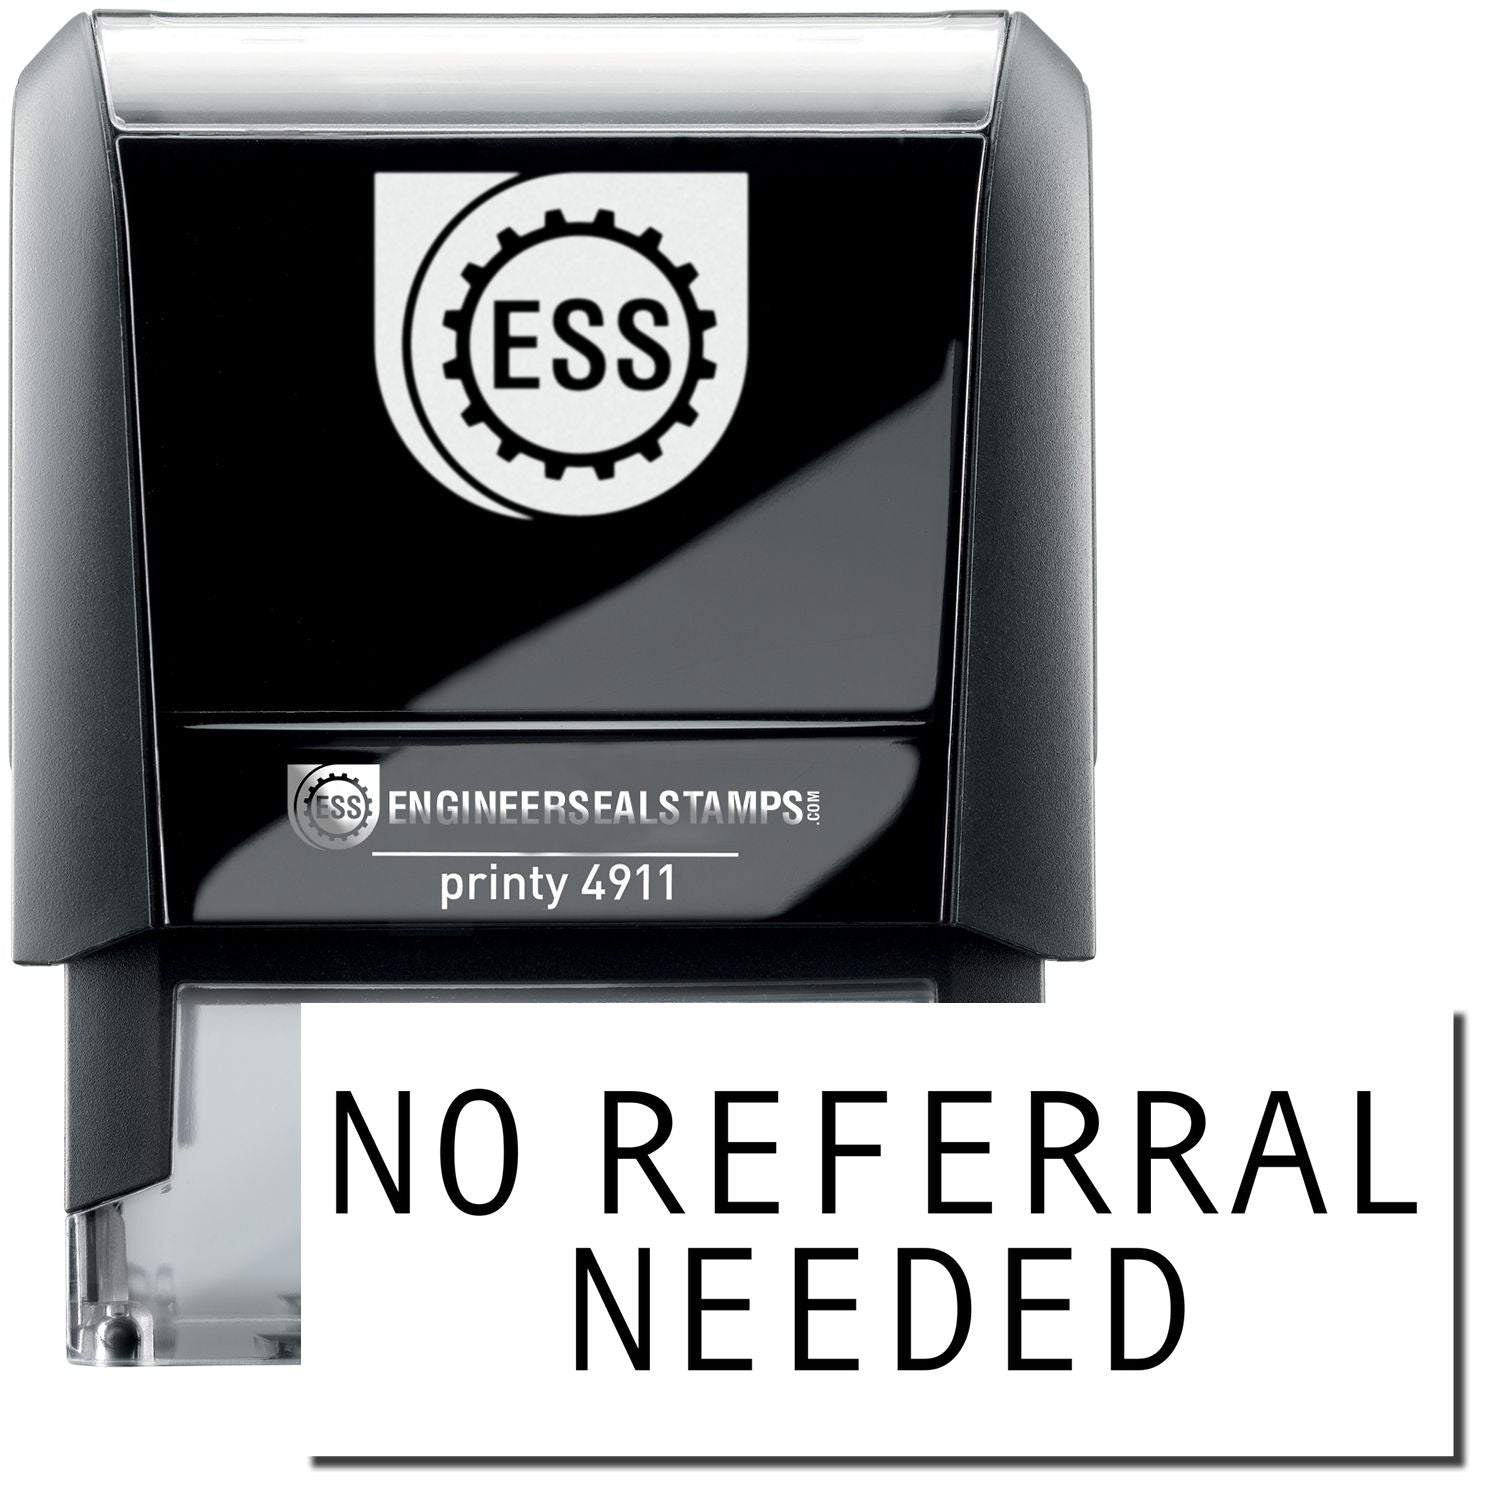 A self-inking stamp with a stamped image showing how the text "NO REFERRAL NEEDED" is displayed after stamping.